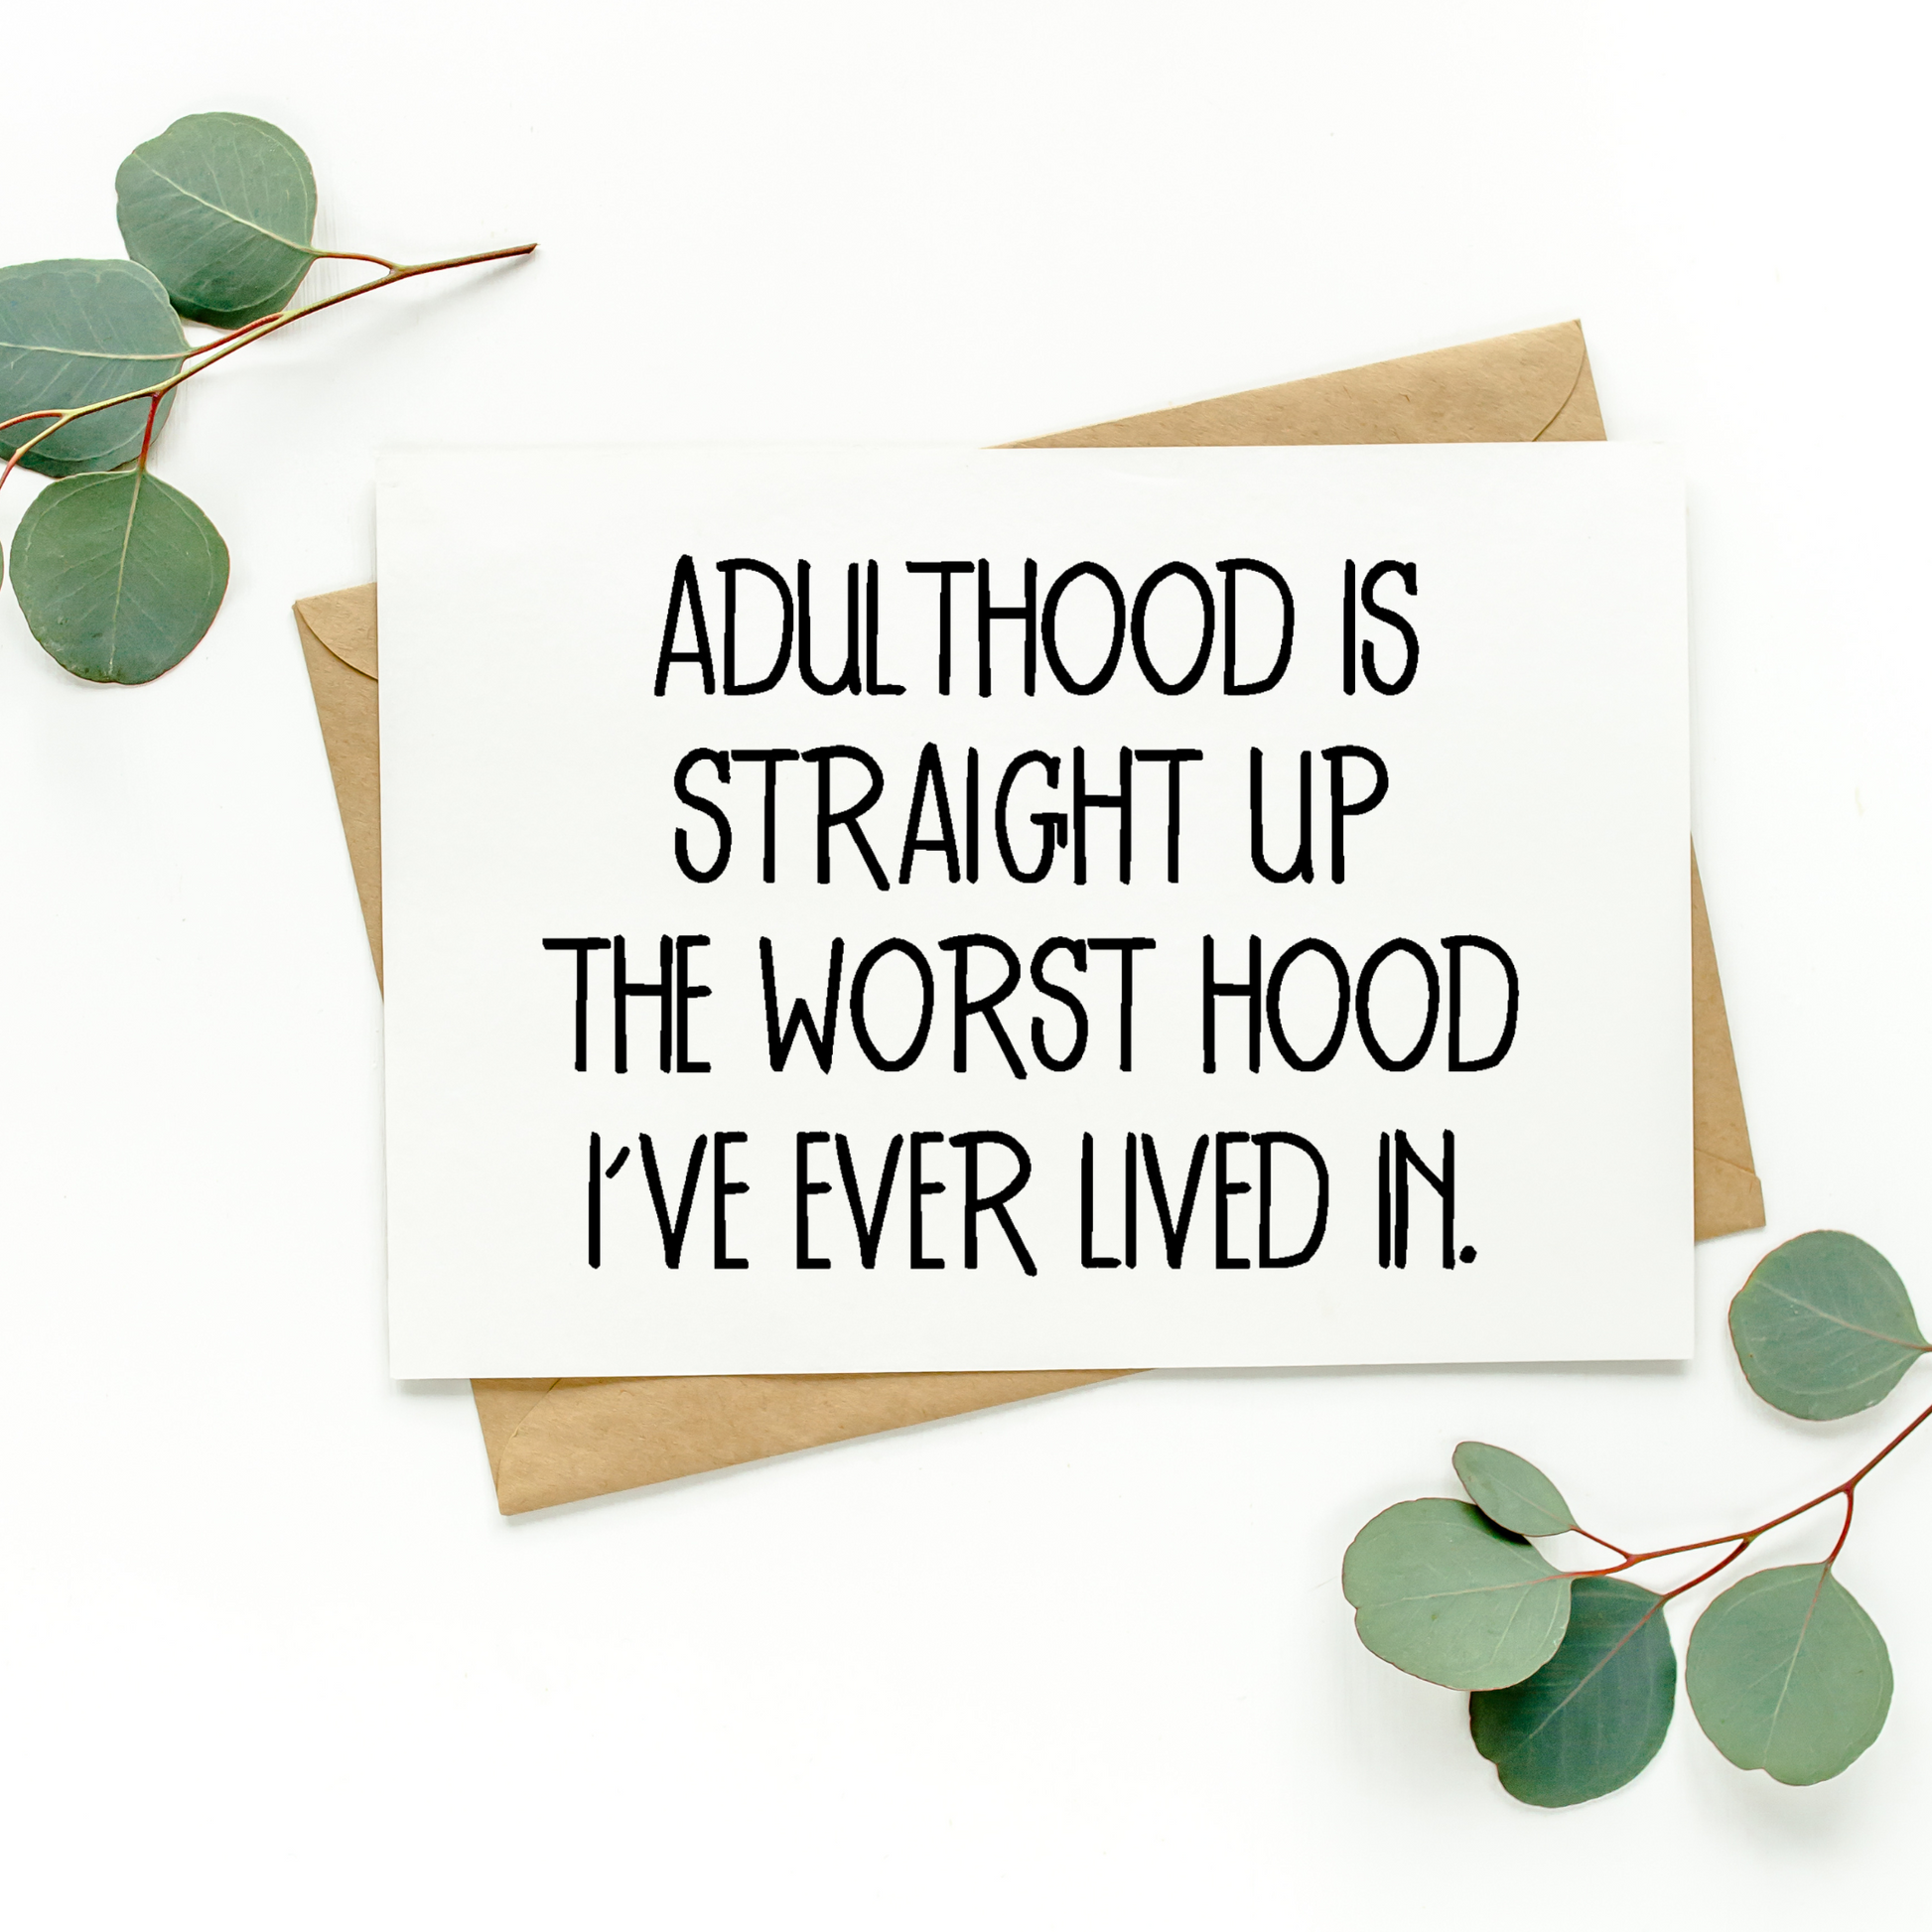 White greeting card with black text on top of Kraft-colored envelope. Card reads "Adulthood Is Straight Up The Worst Hood I've Ever Lived In." Background of photo is white with green leaves in the top left and bottom right corners.